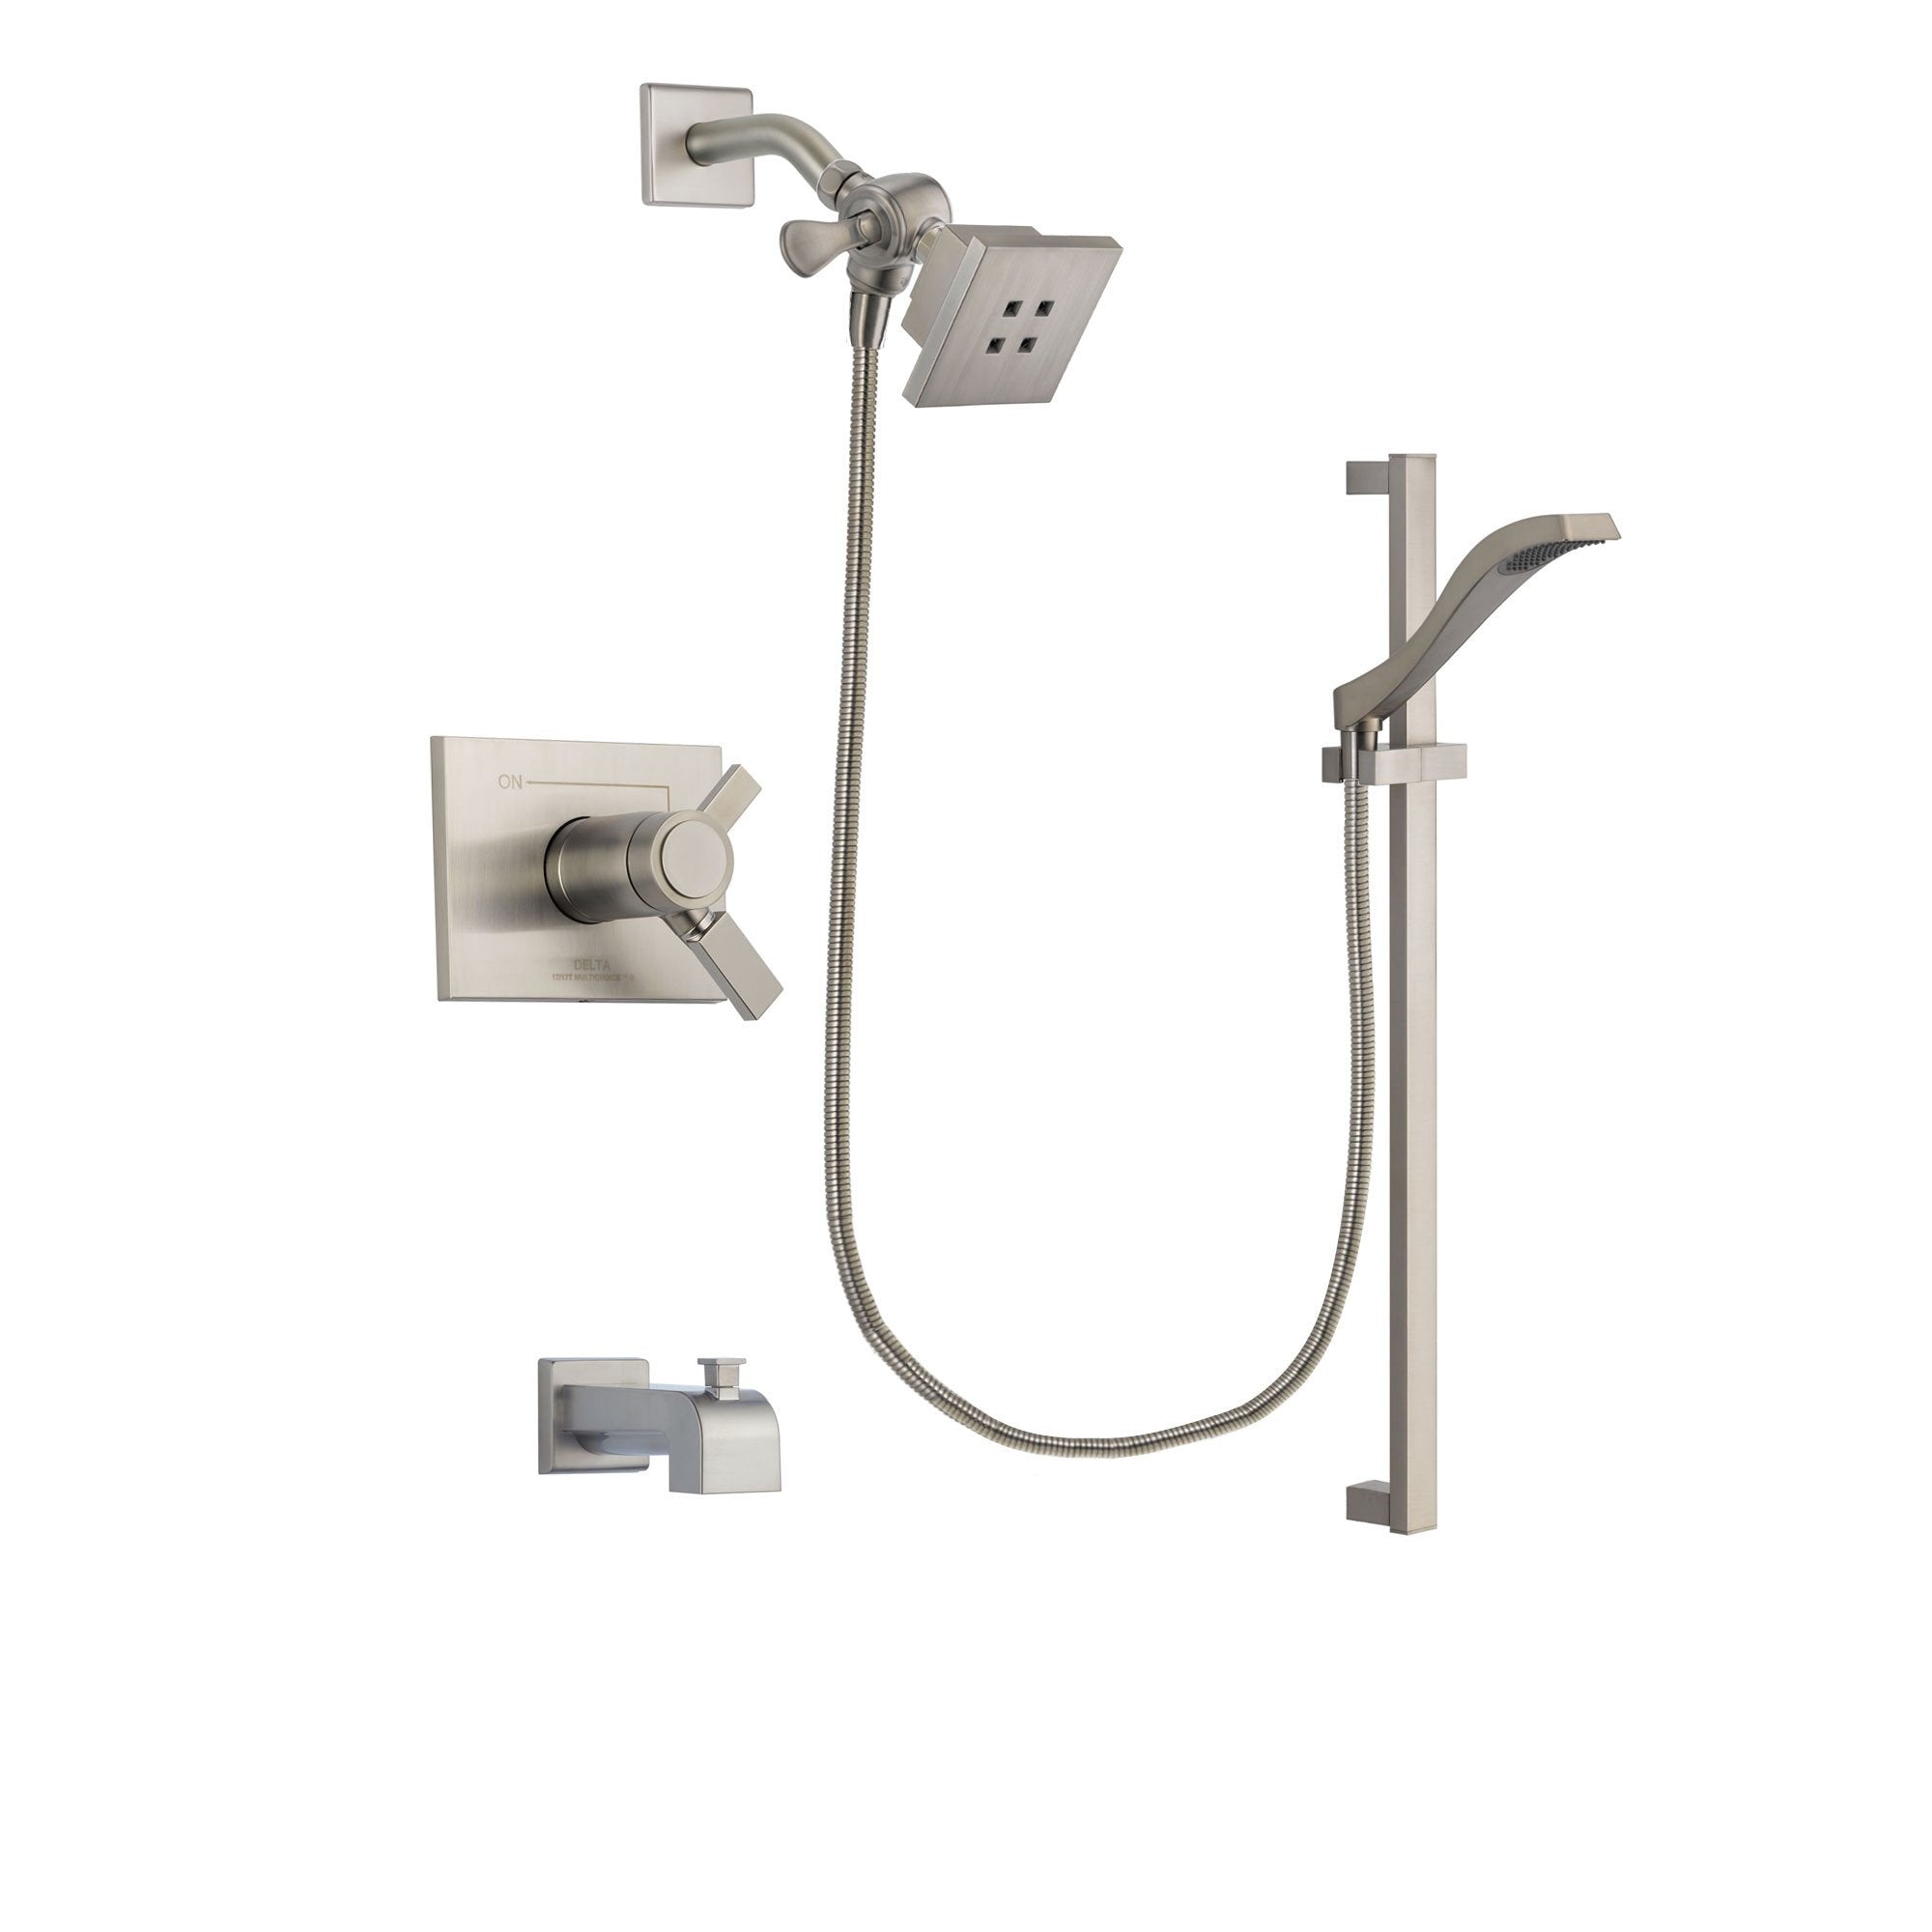 Delta Vero Stainless Steel Finish Thermostatic Tub and Shower Faucet System Package with Square Showerhead and Handheld Shower with Slide Bar Includes Rough-in Valve and Tub Spout DSP2221V